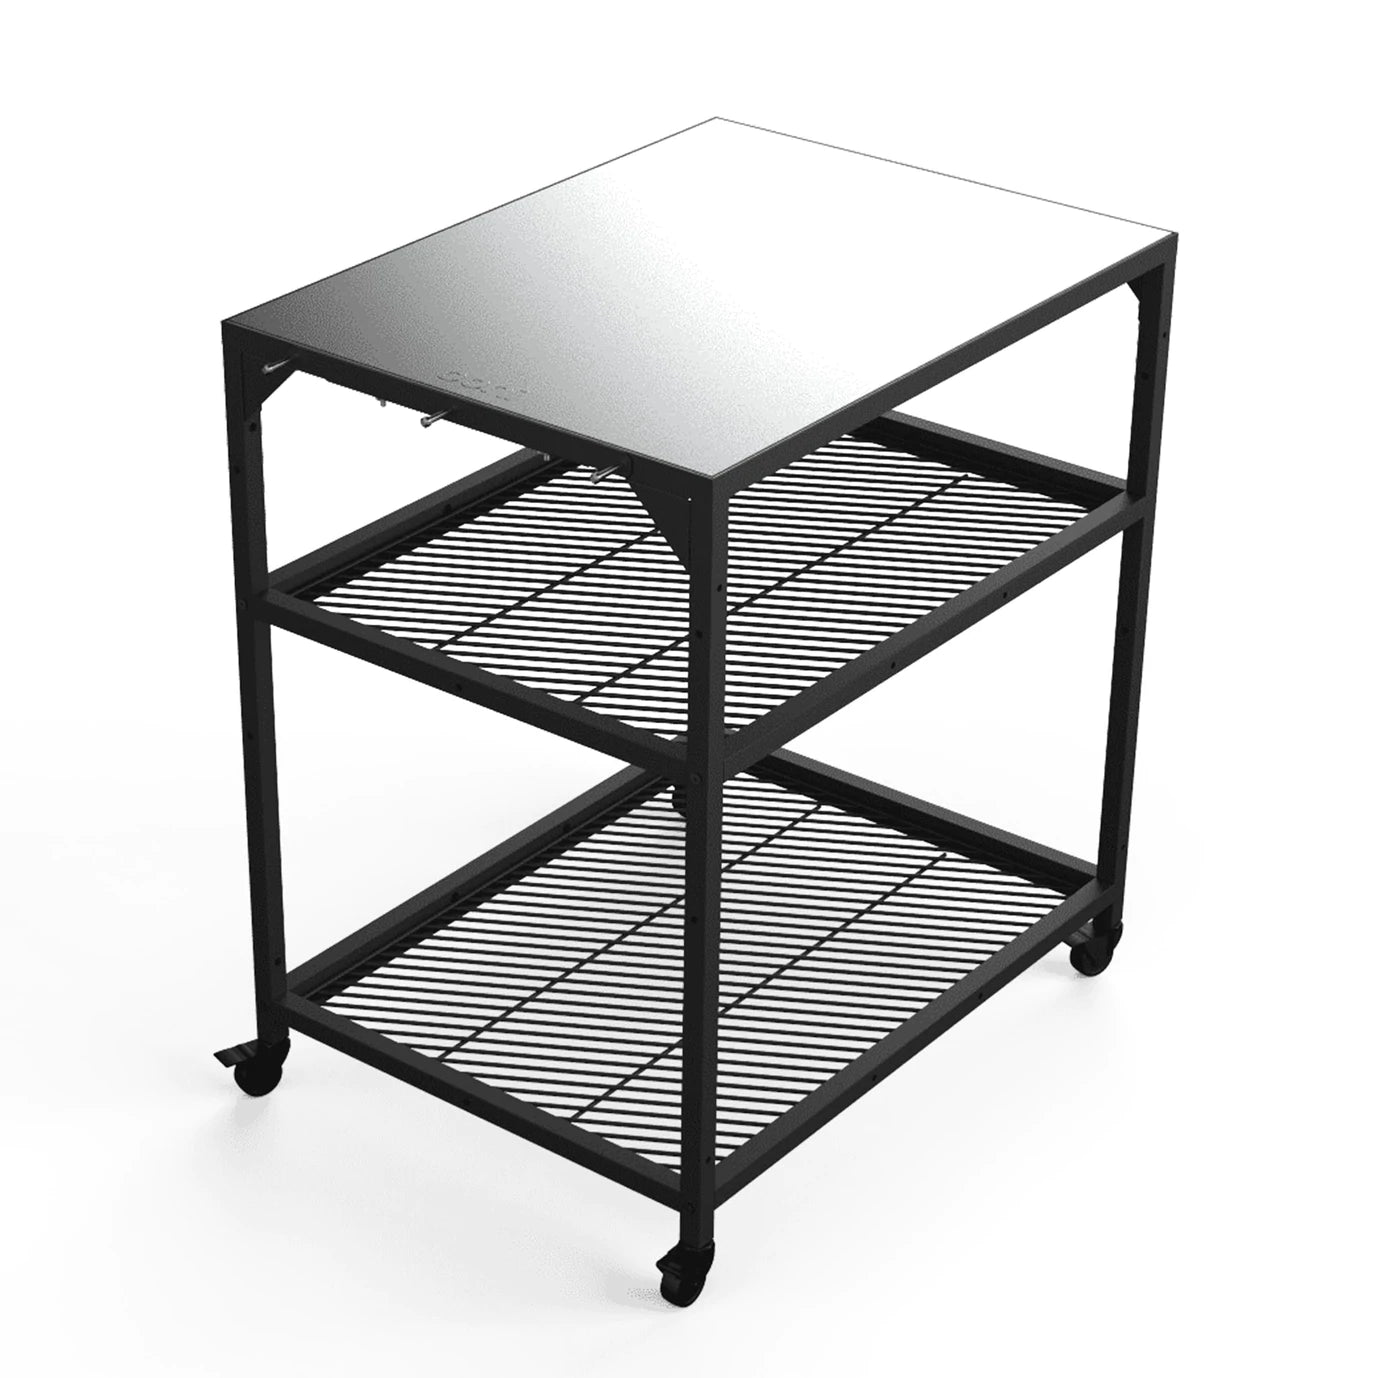 Table inox modulaire Ooni - Taille moyenne    - Ooni - Four à pizza - 